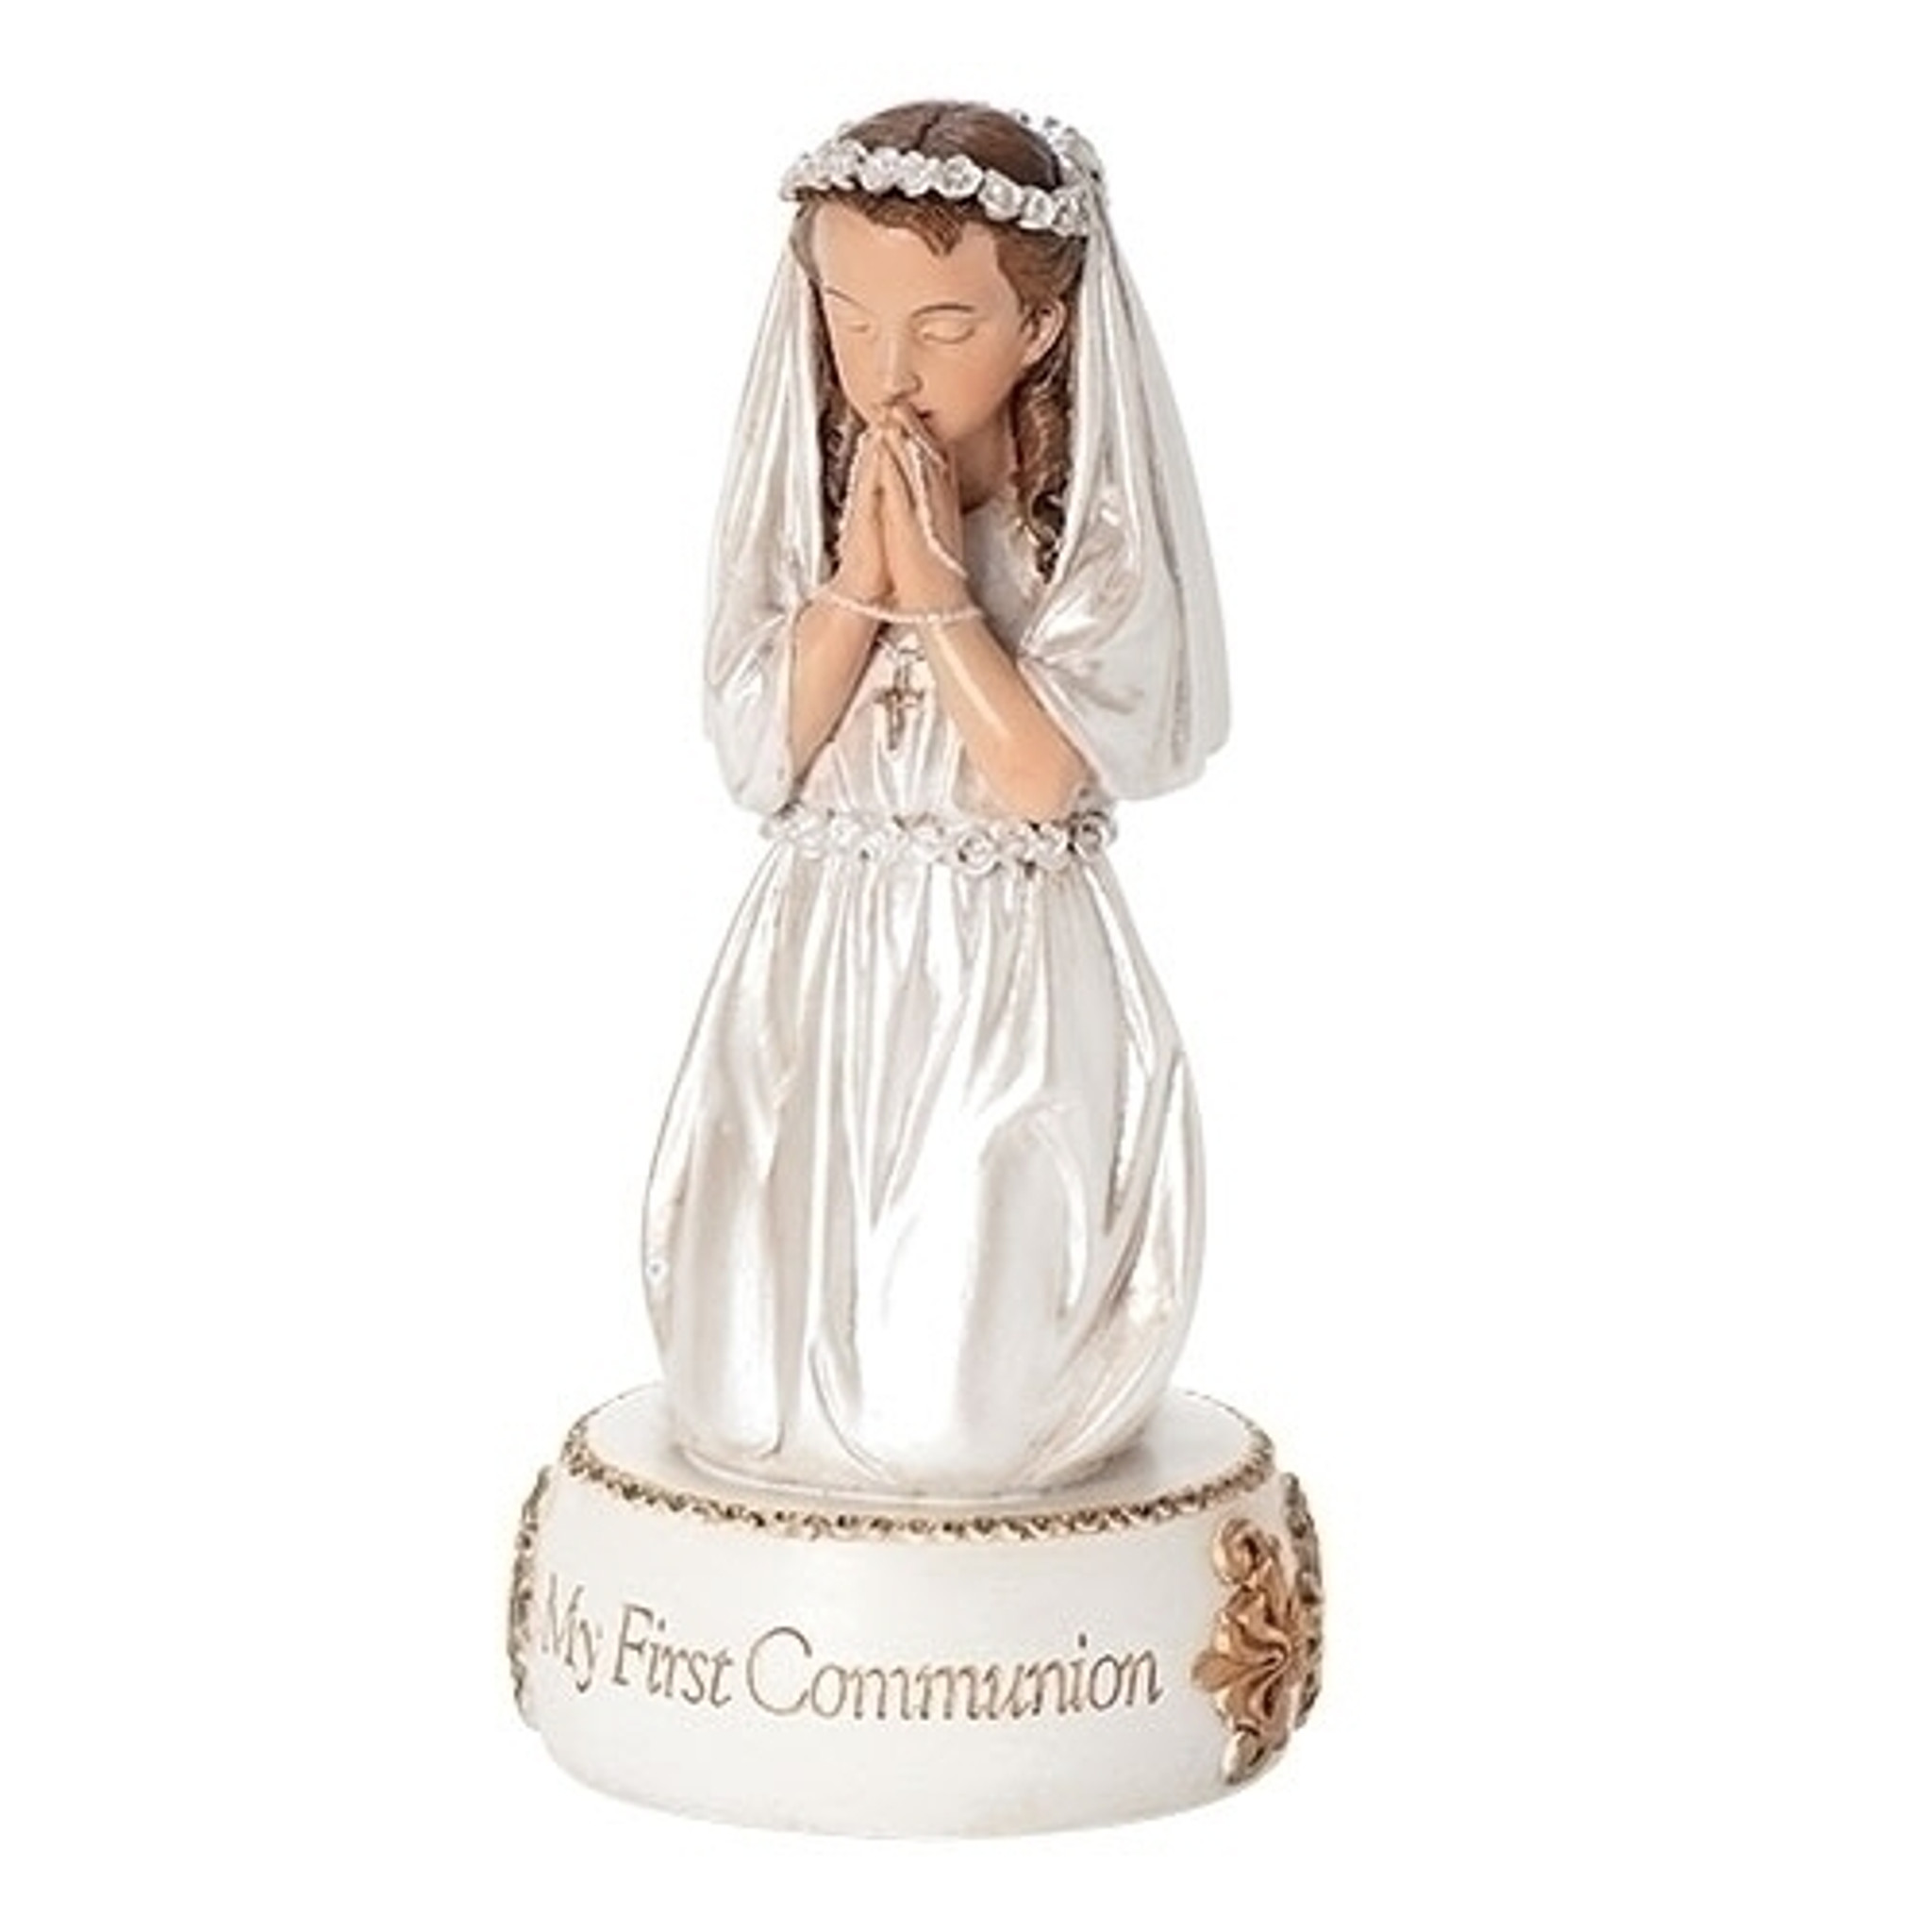 Communion Praying Figurines - Perfect For A Cake Topper!